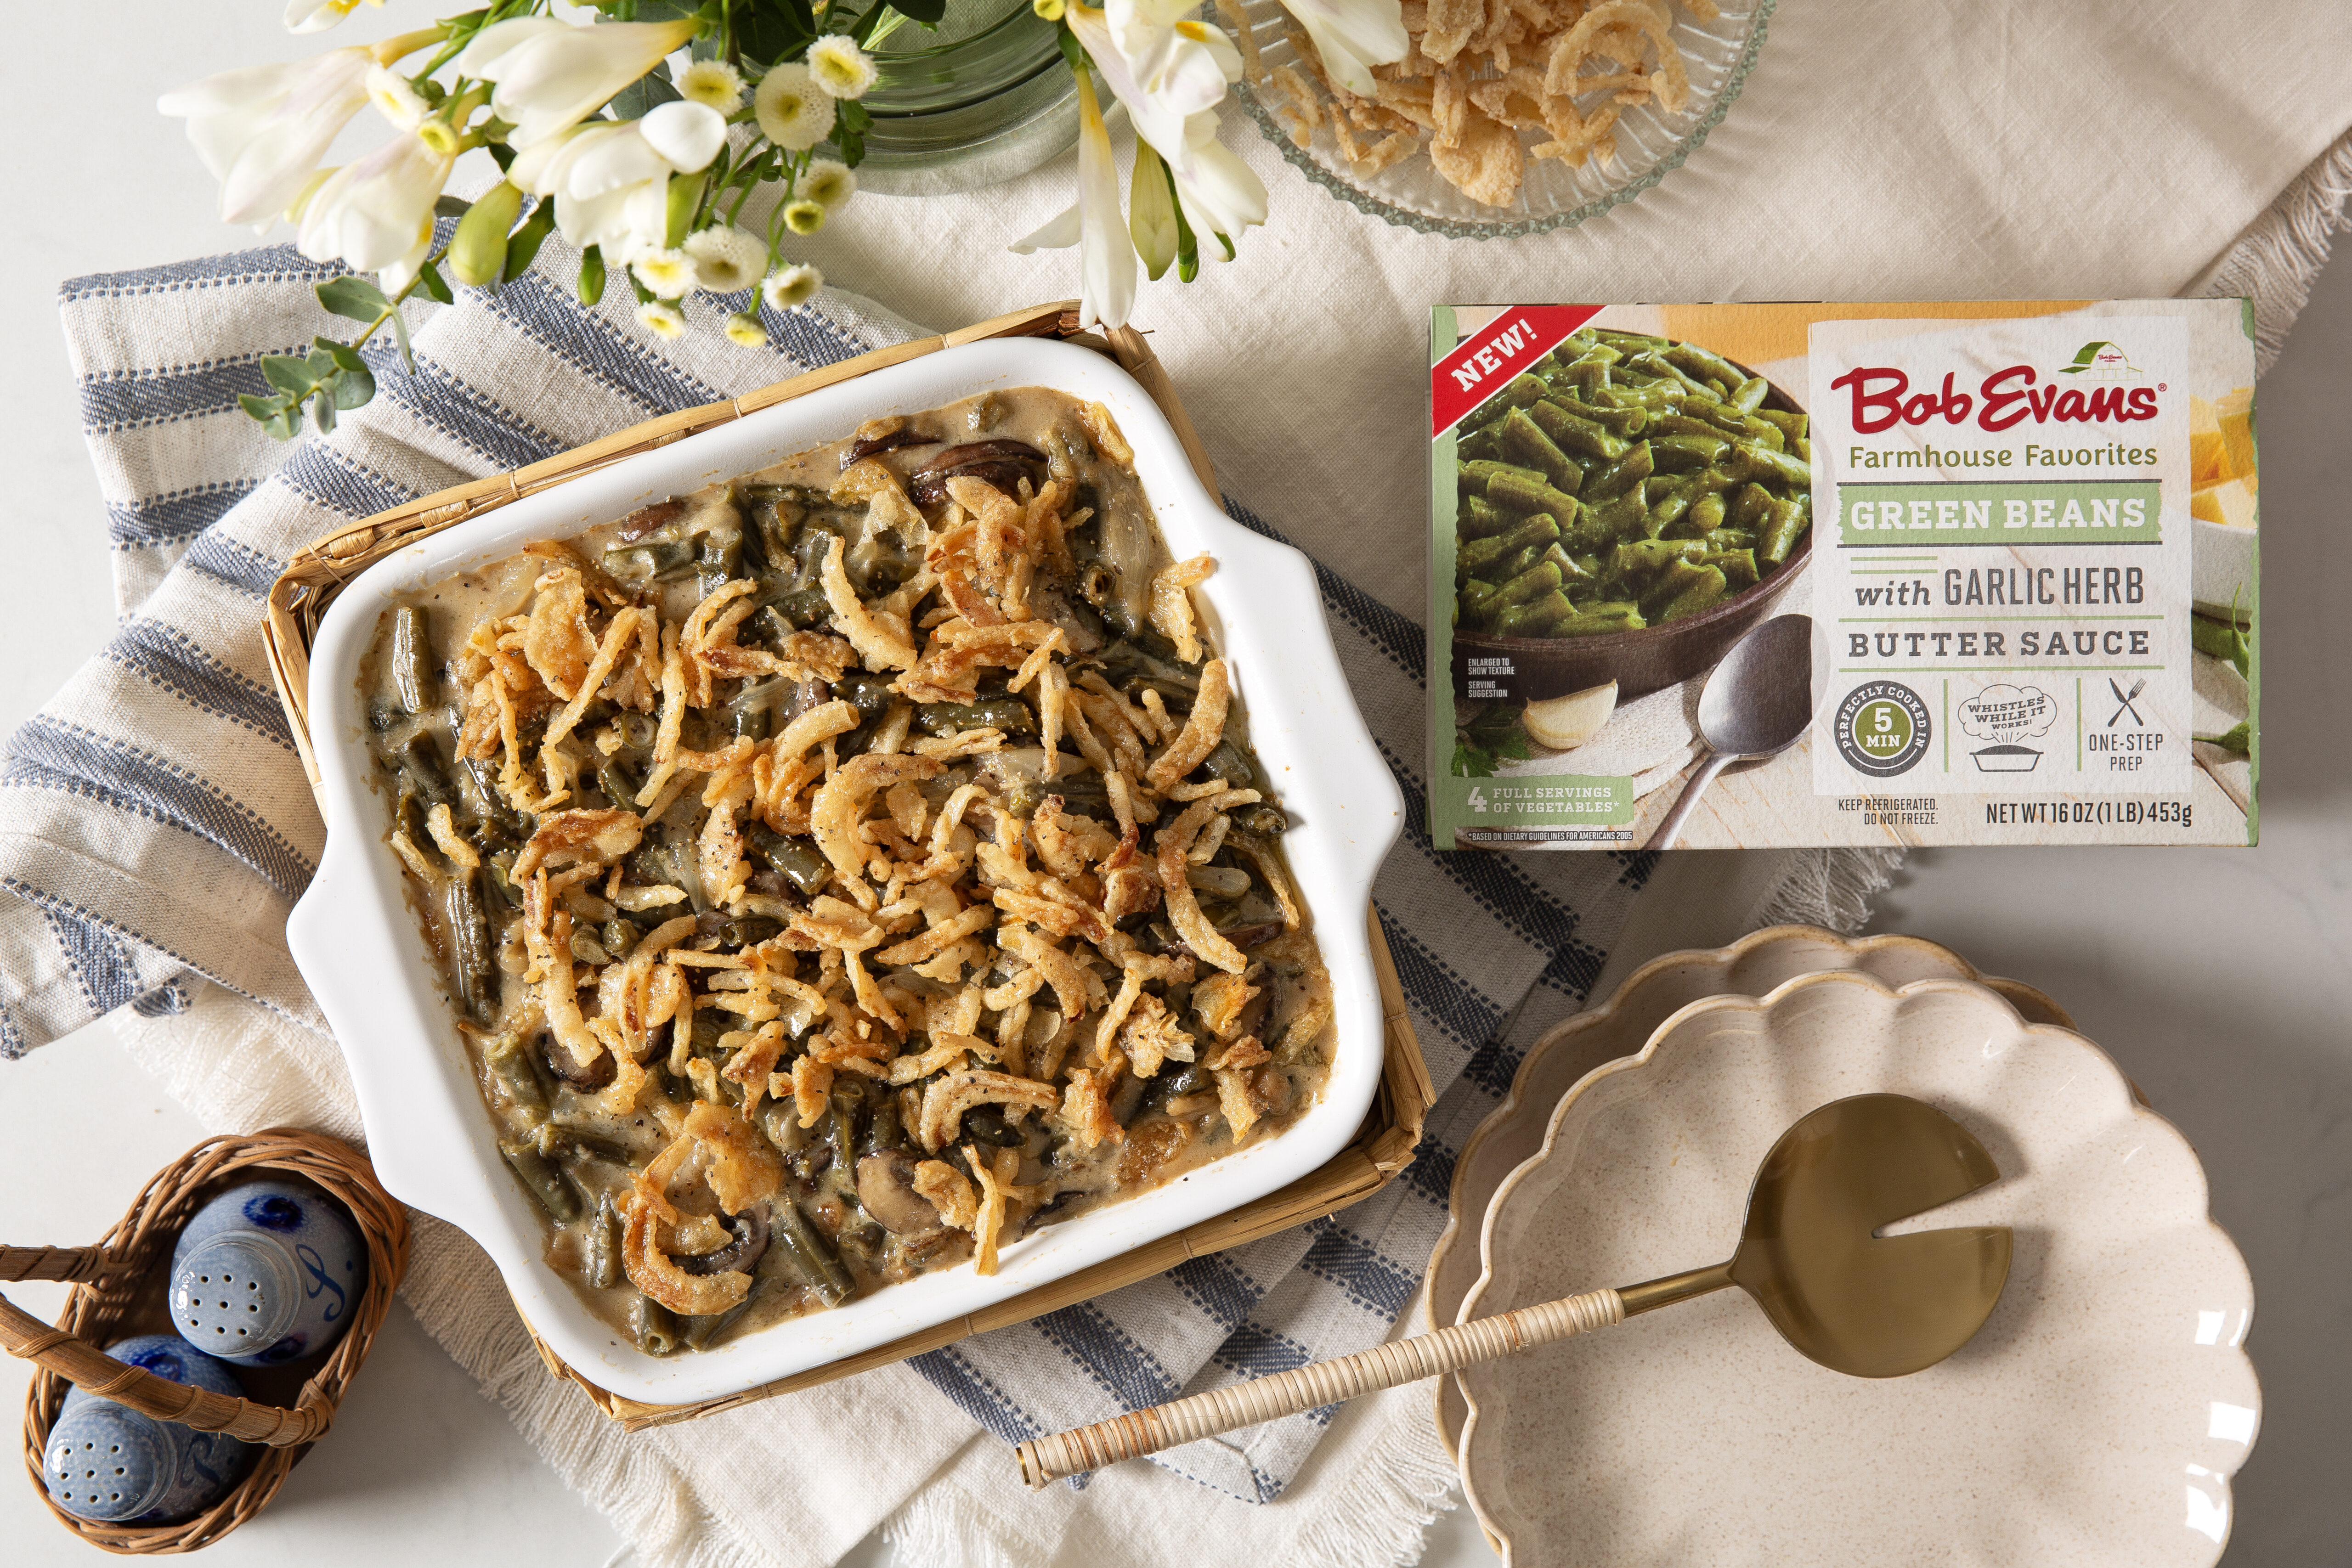 herbed green bean casserole next to a package of Bob Evans Green Beans with Garlic Herb Butter Sauce